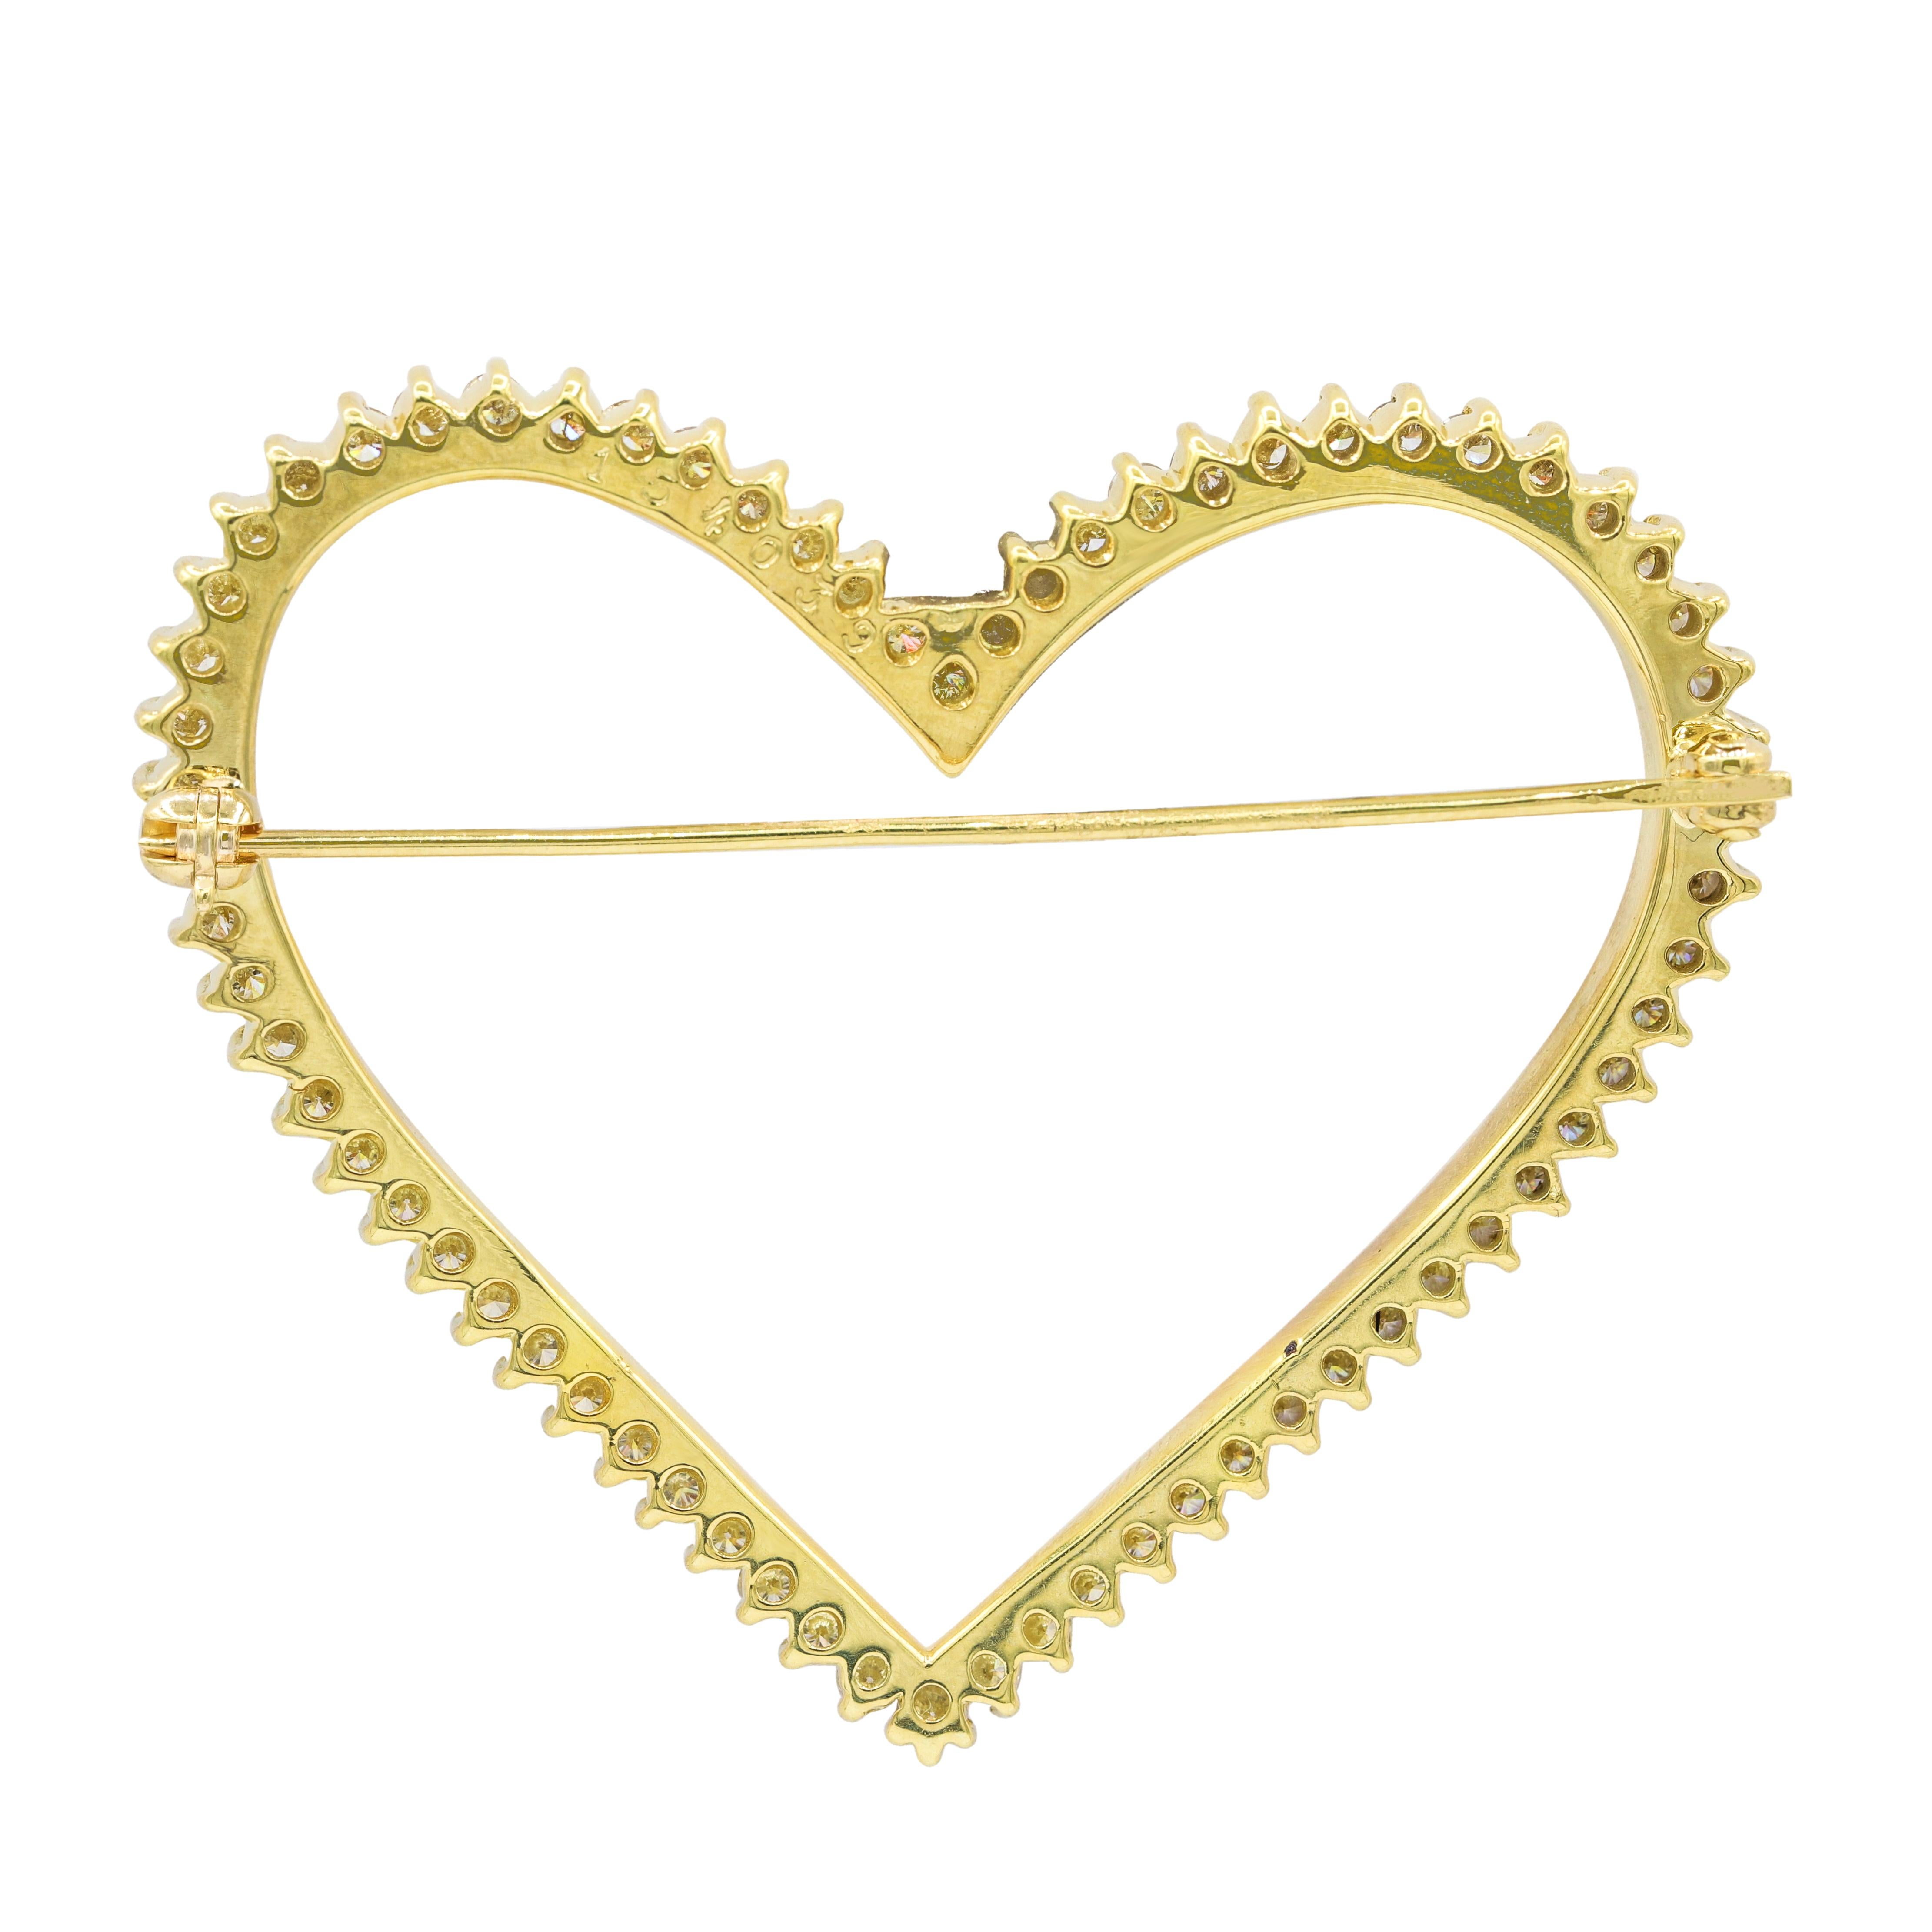 Elegant 14KT yellow gold heart shape brooch features 3.00 cts of diamonds G-H color, VS clarity